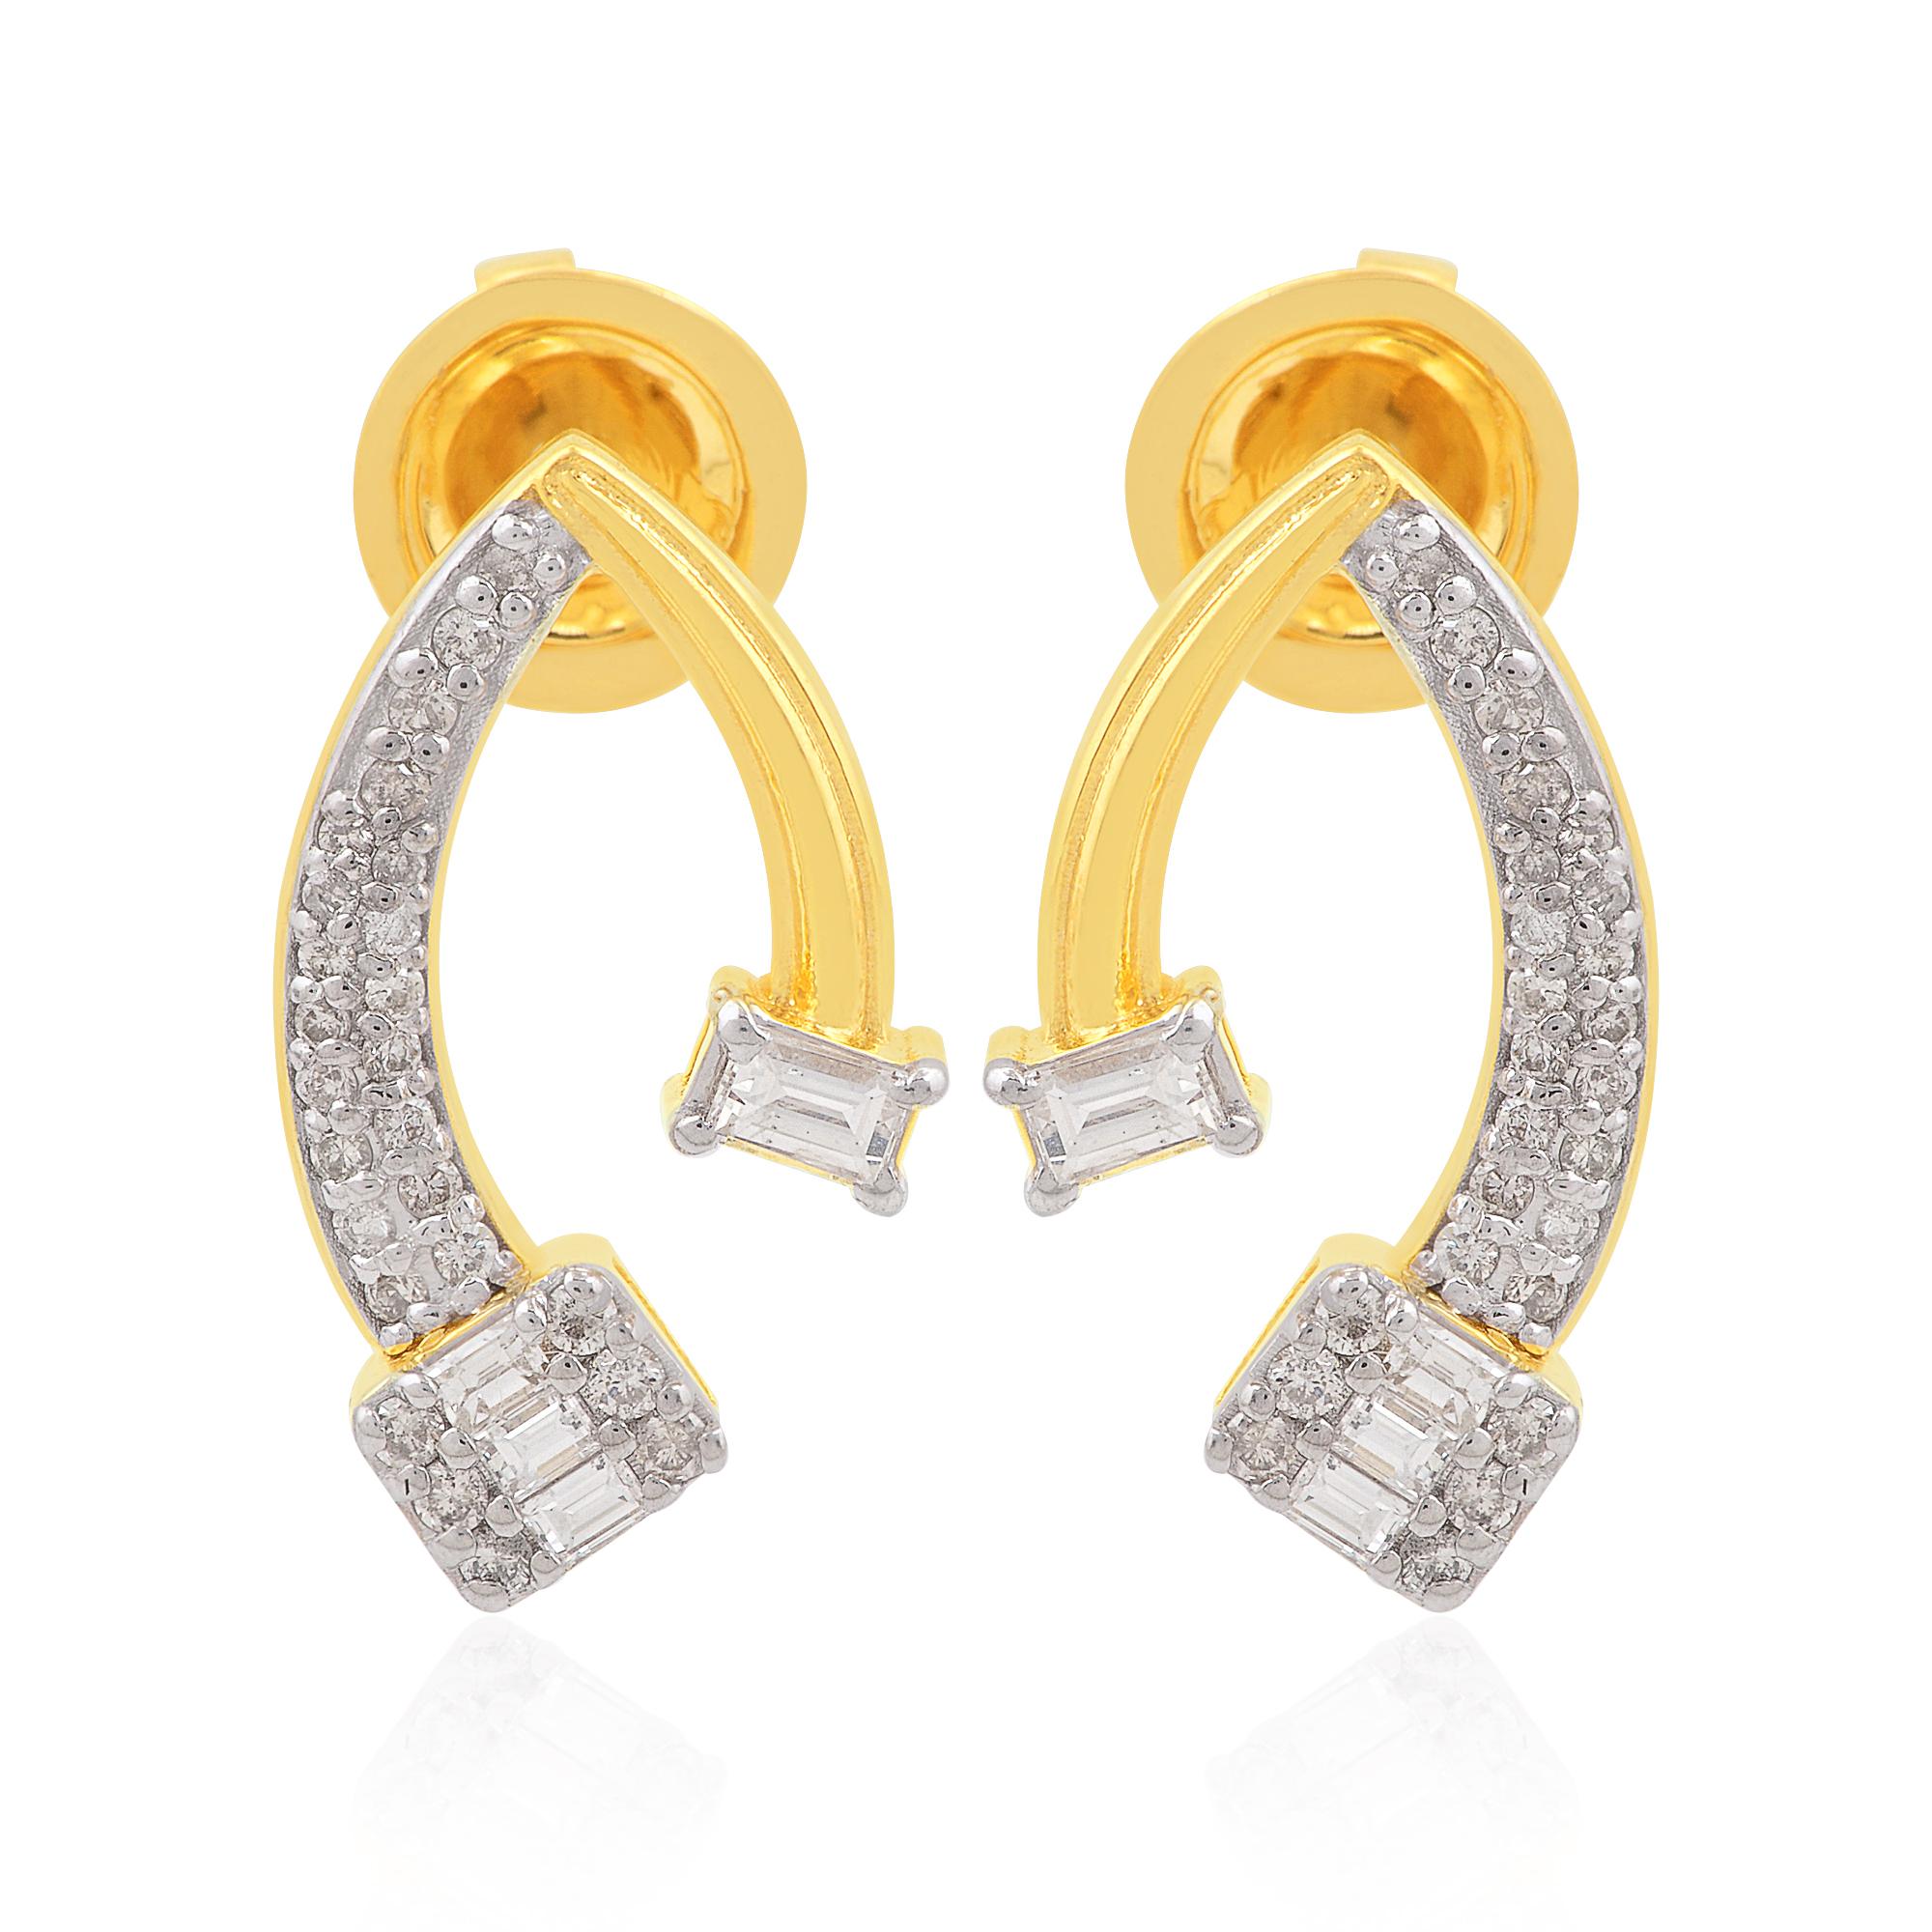 Item Code :- SEE-1857A
Gross Wt. :- 3.80 gm
18k Solid Yellow Gold Wt. :- 3.68 gm
Natural Diamond Wt. :- 0.58 Ct. ( AVERAGE DIAMOND CLARITY SI1-SI2 & COLOR H-I )
Earrings Size :- 17 mm approx.

✦ Sizing
.....................
We can adjust most items